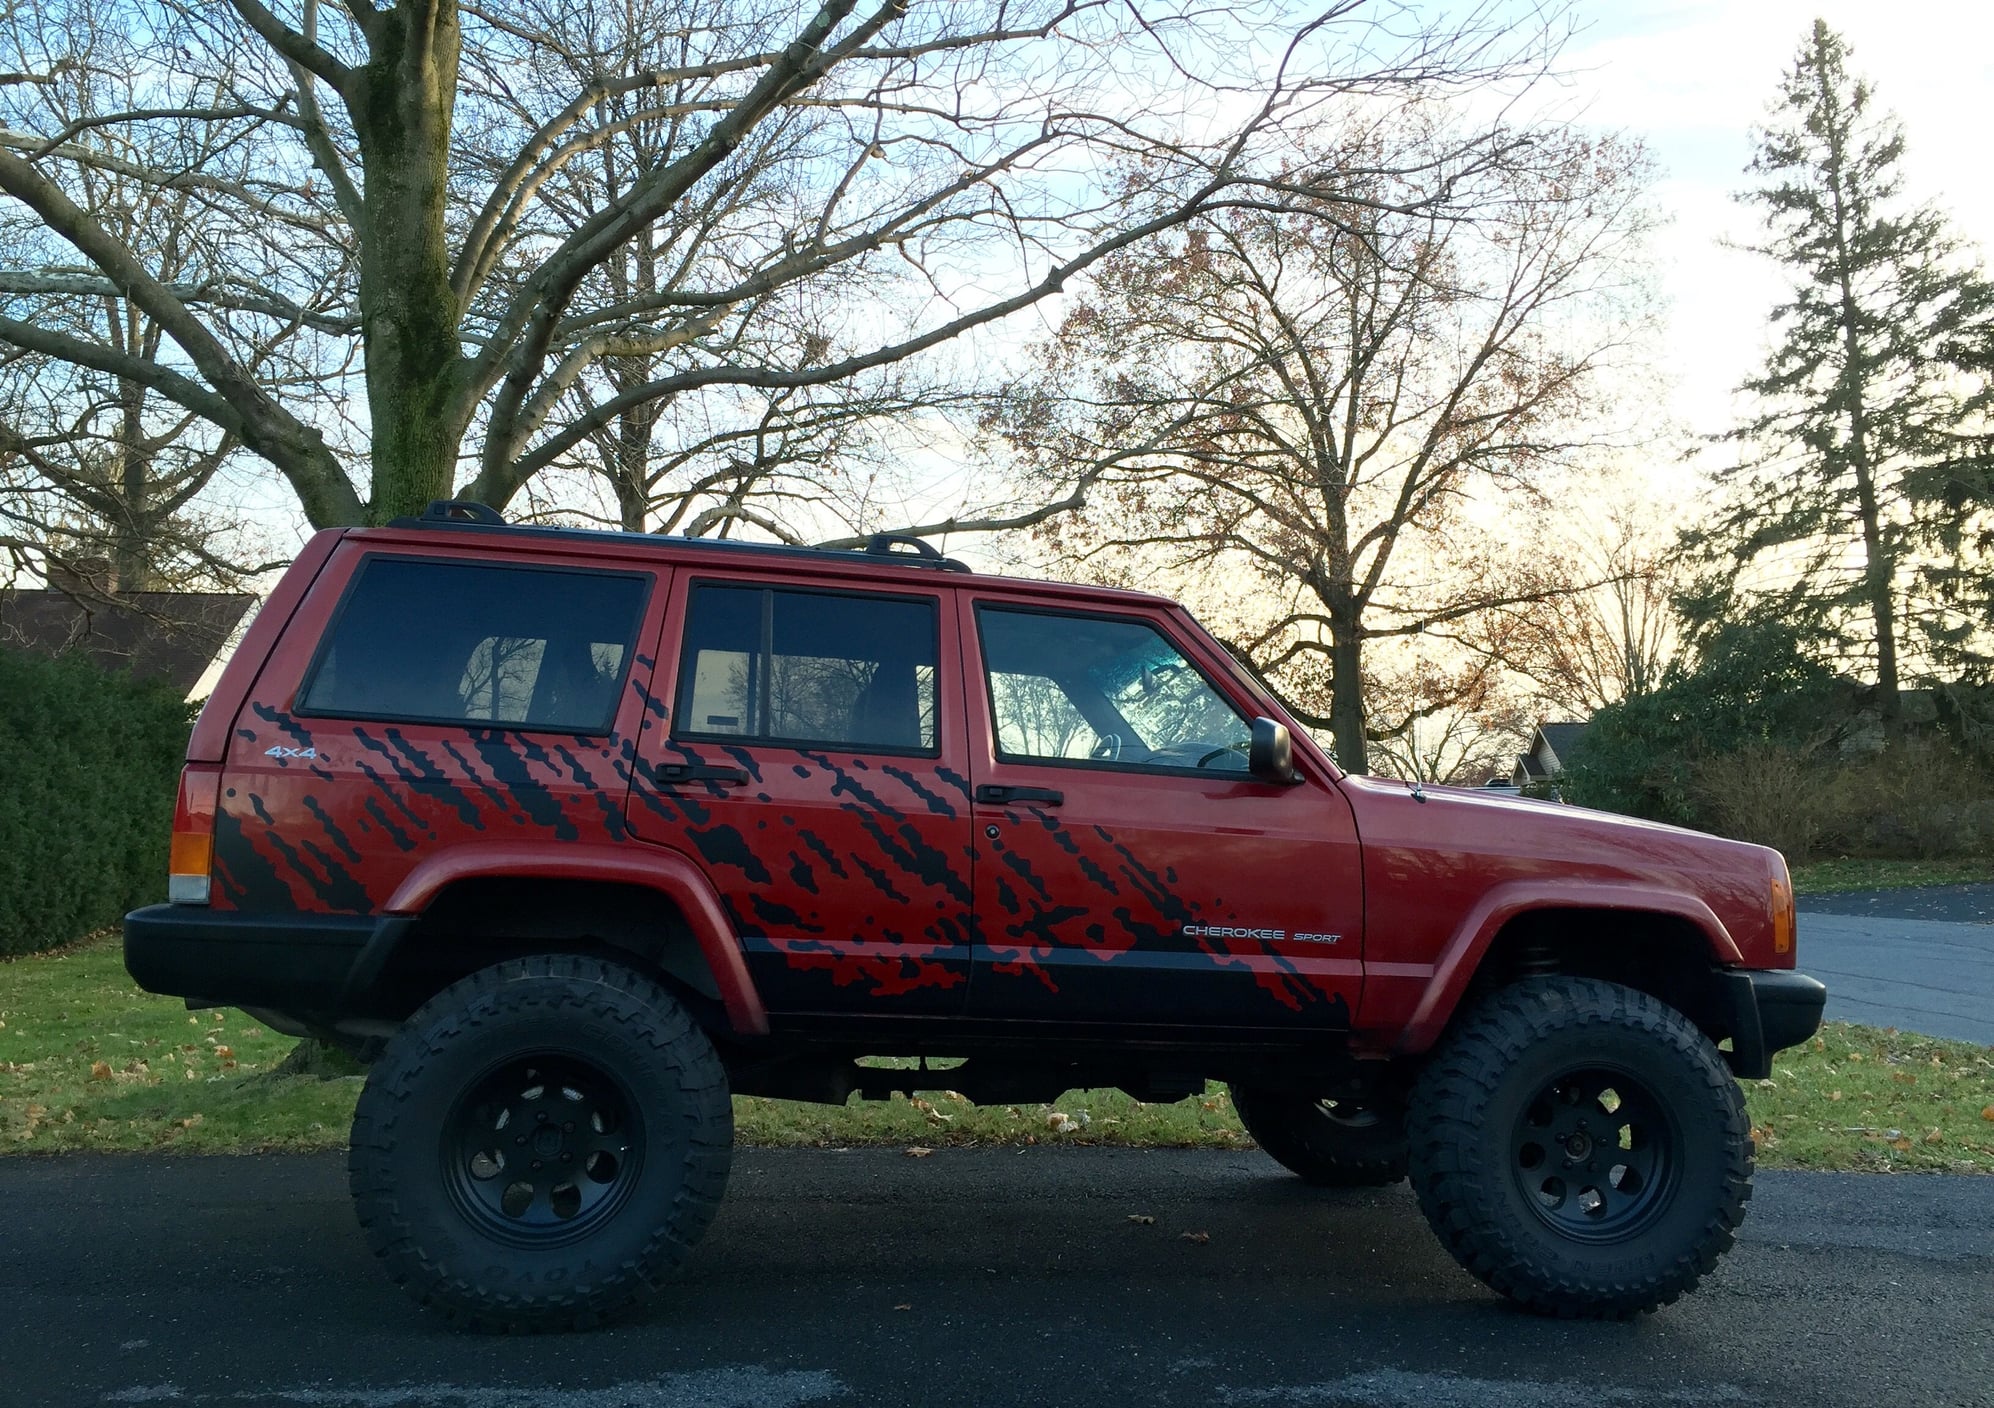 [FS] Raptor style XJ graphics for all 84 01 models